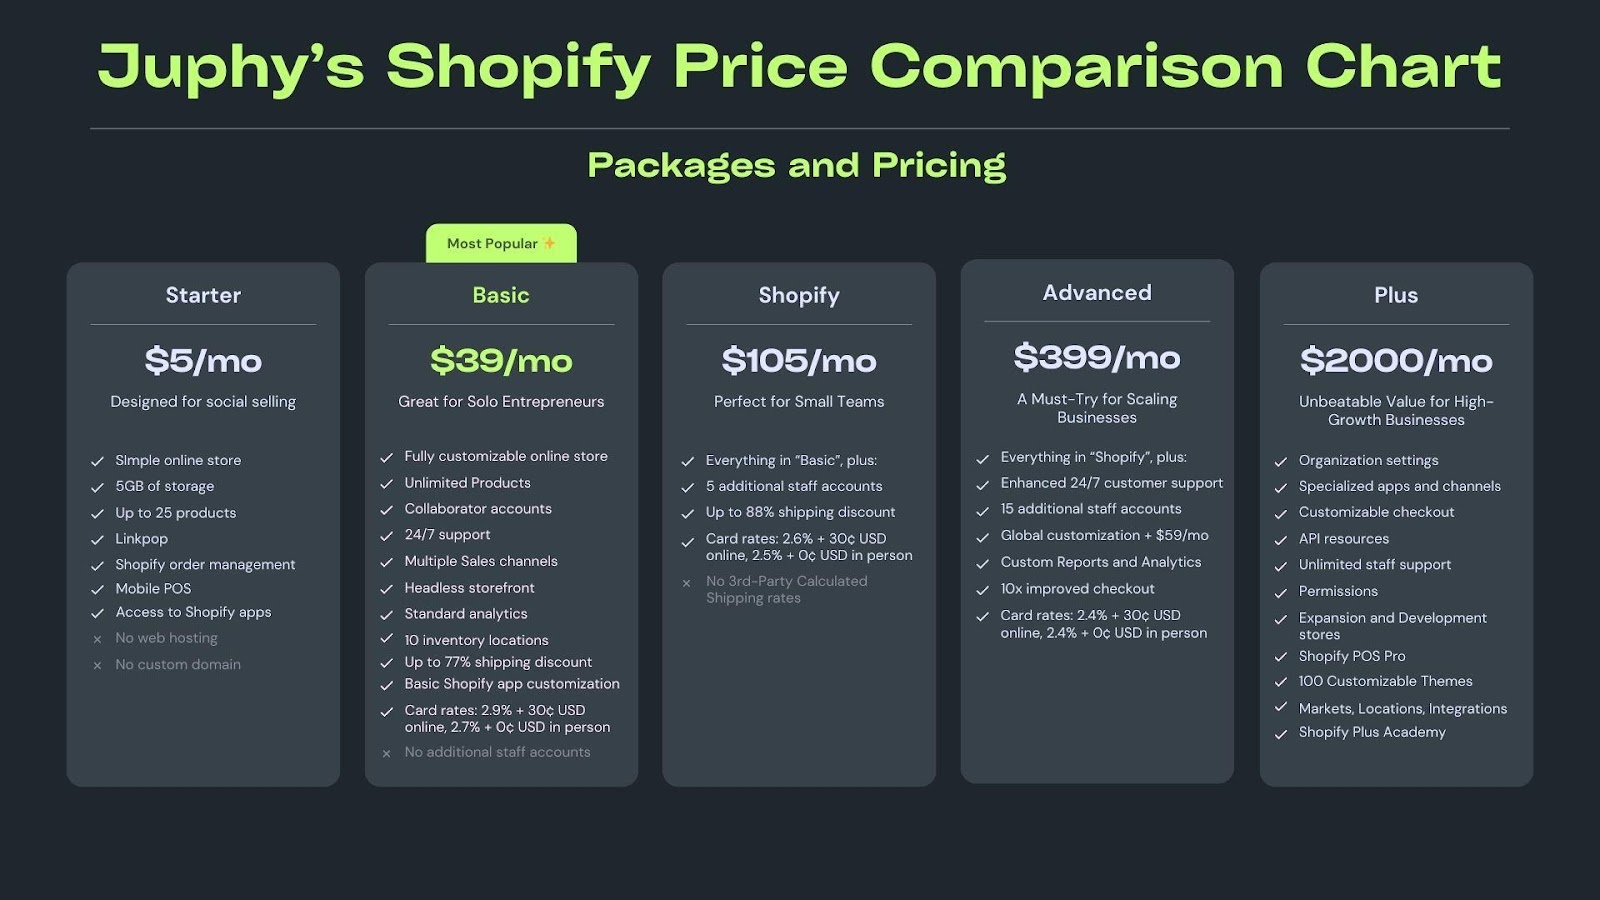 Juphy's Shopify Pricing Plan Comparison Chart